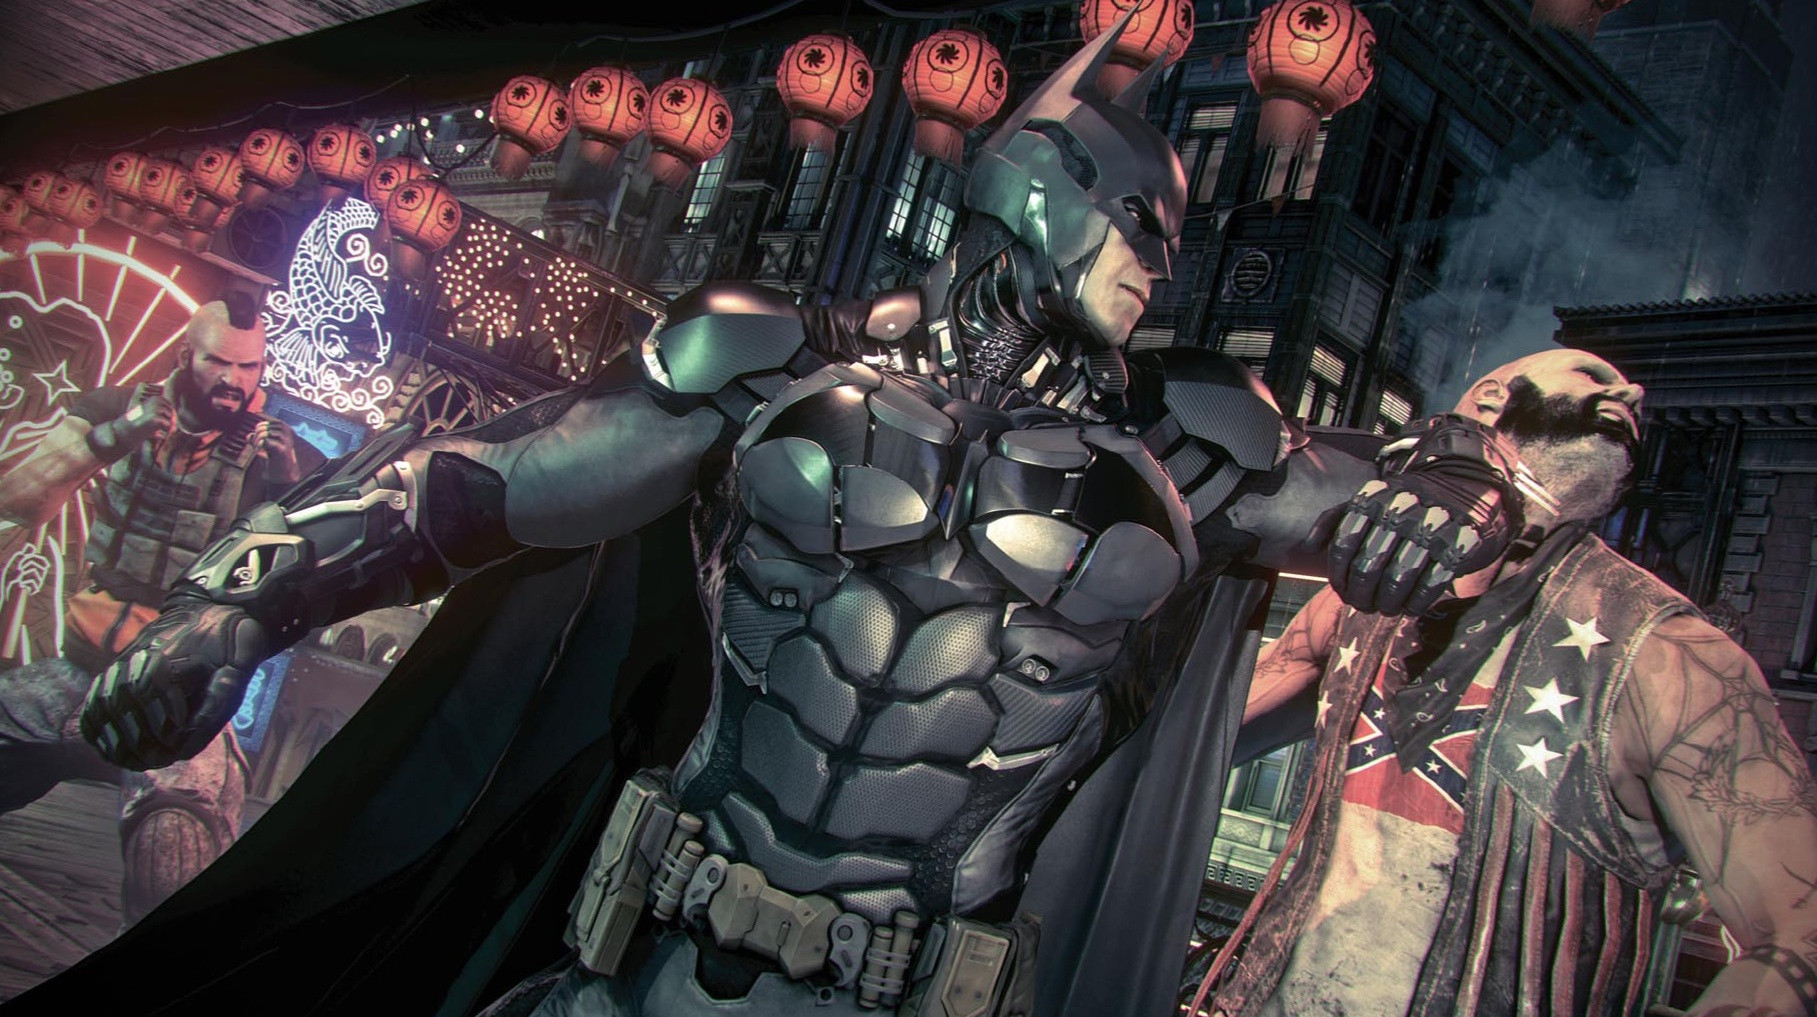 Amplifying Batman: Enhanced Graphics for Arkham Knight with